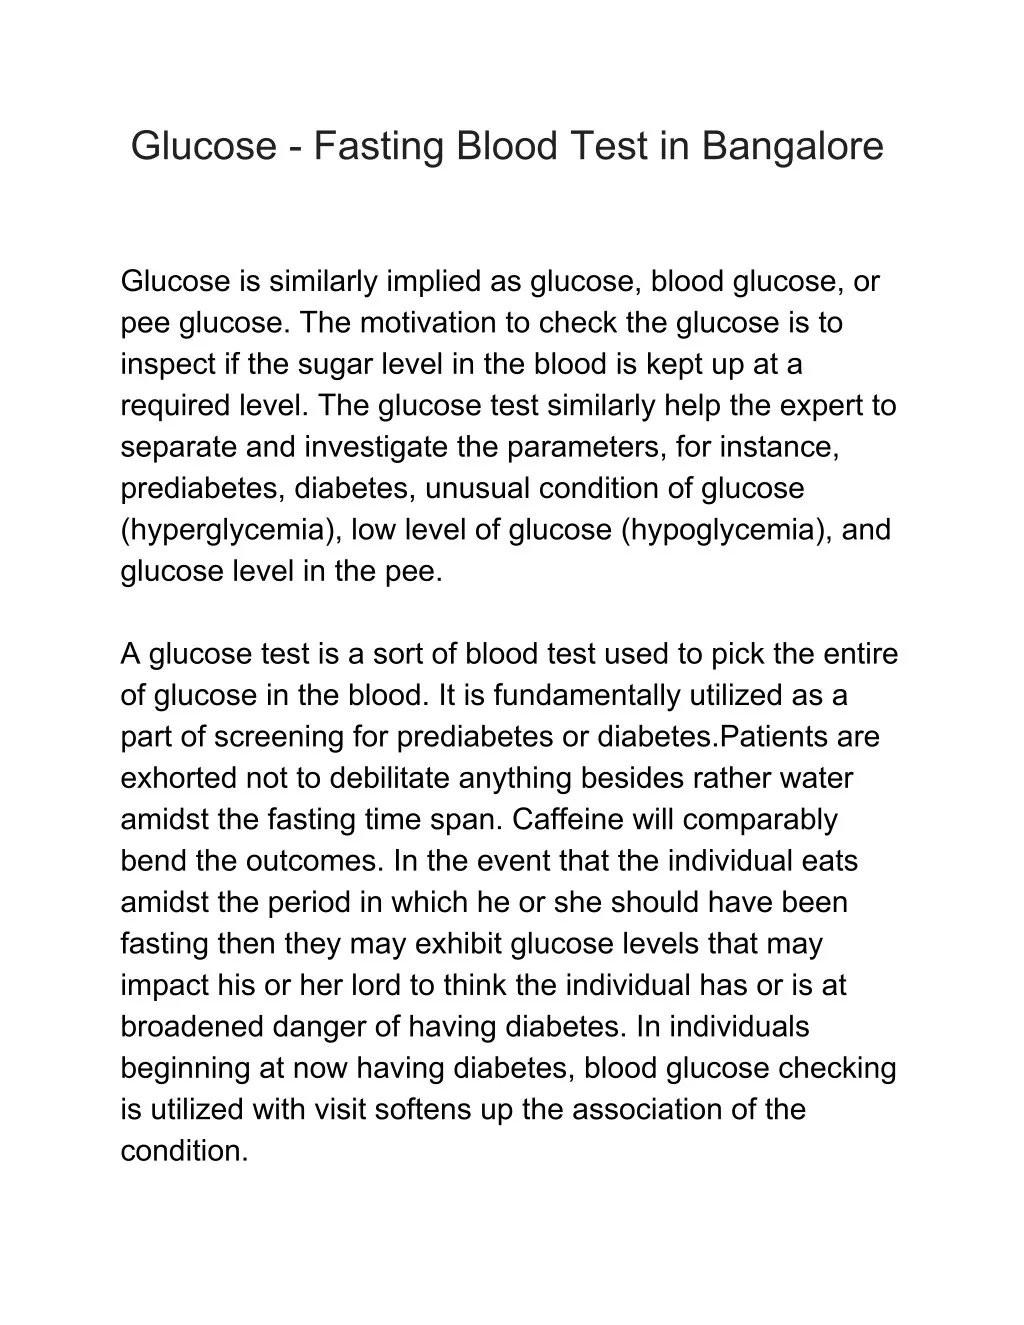 glucose fasting blood test in bangalore